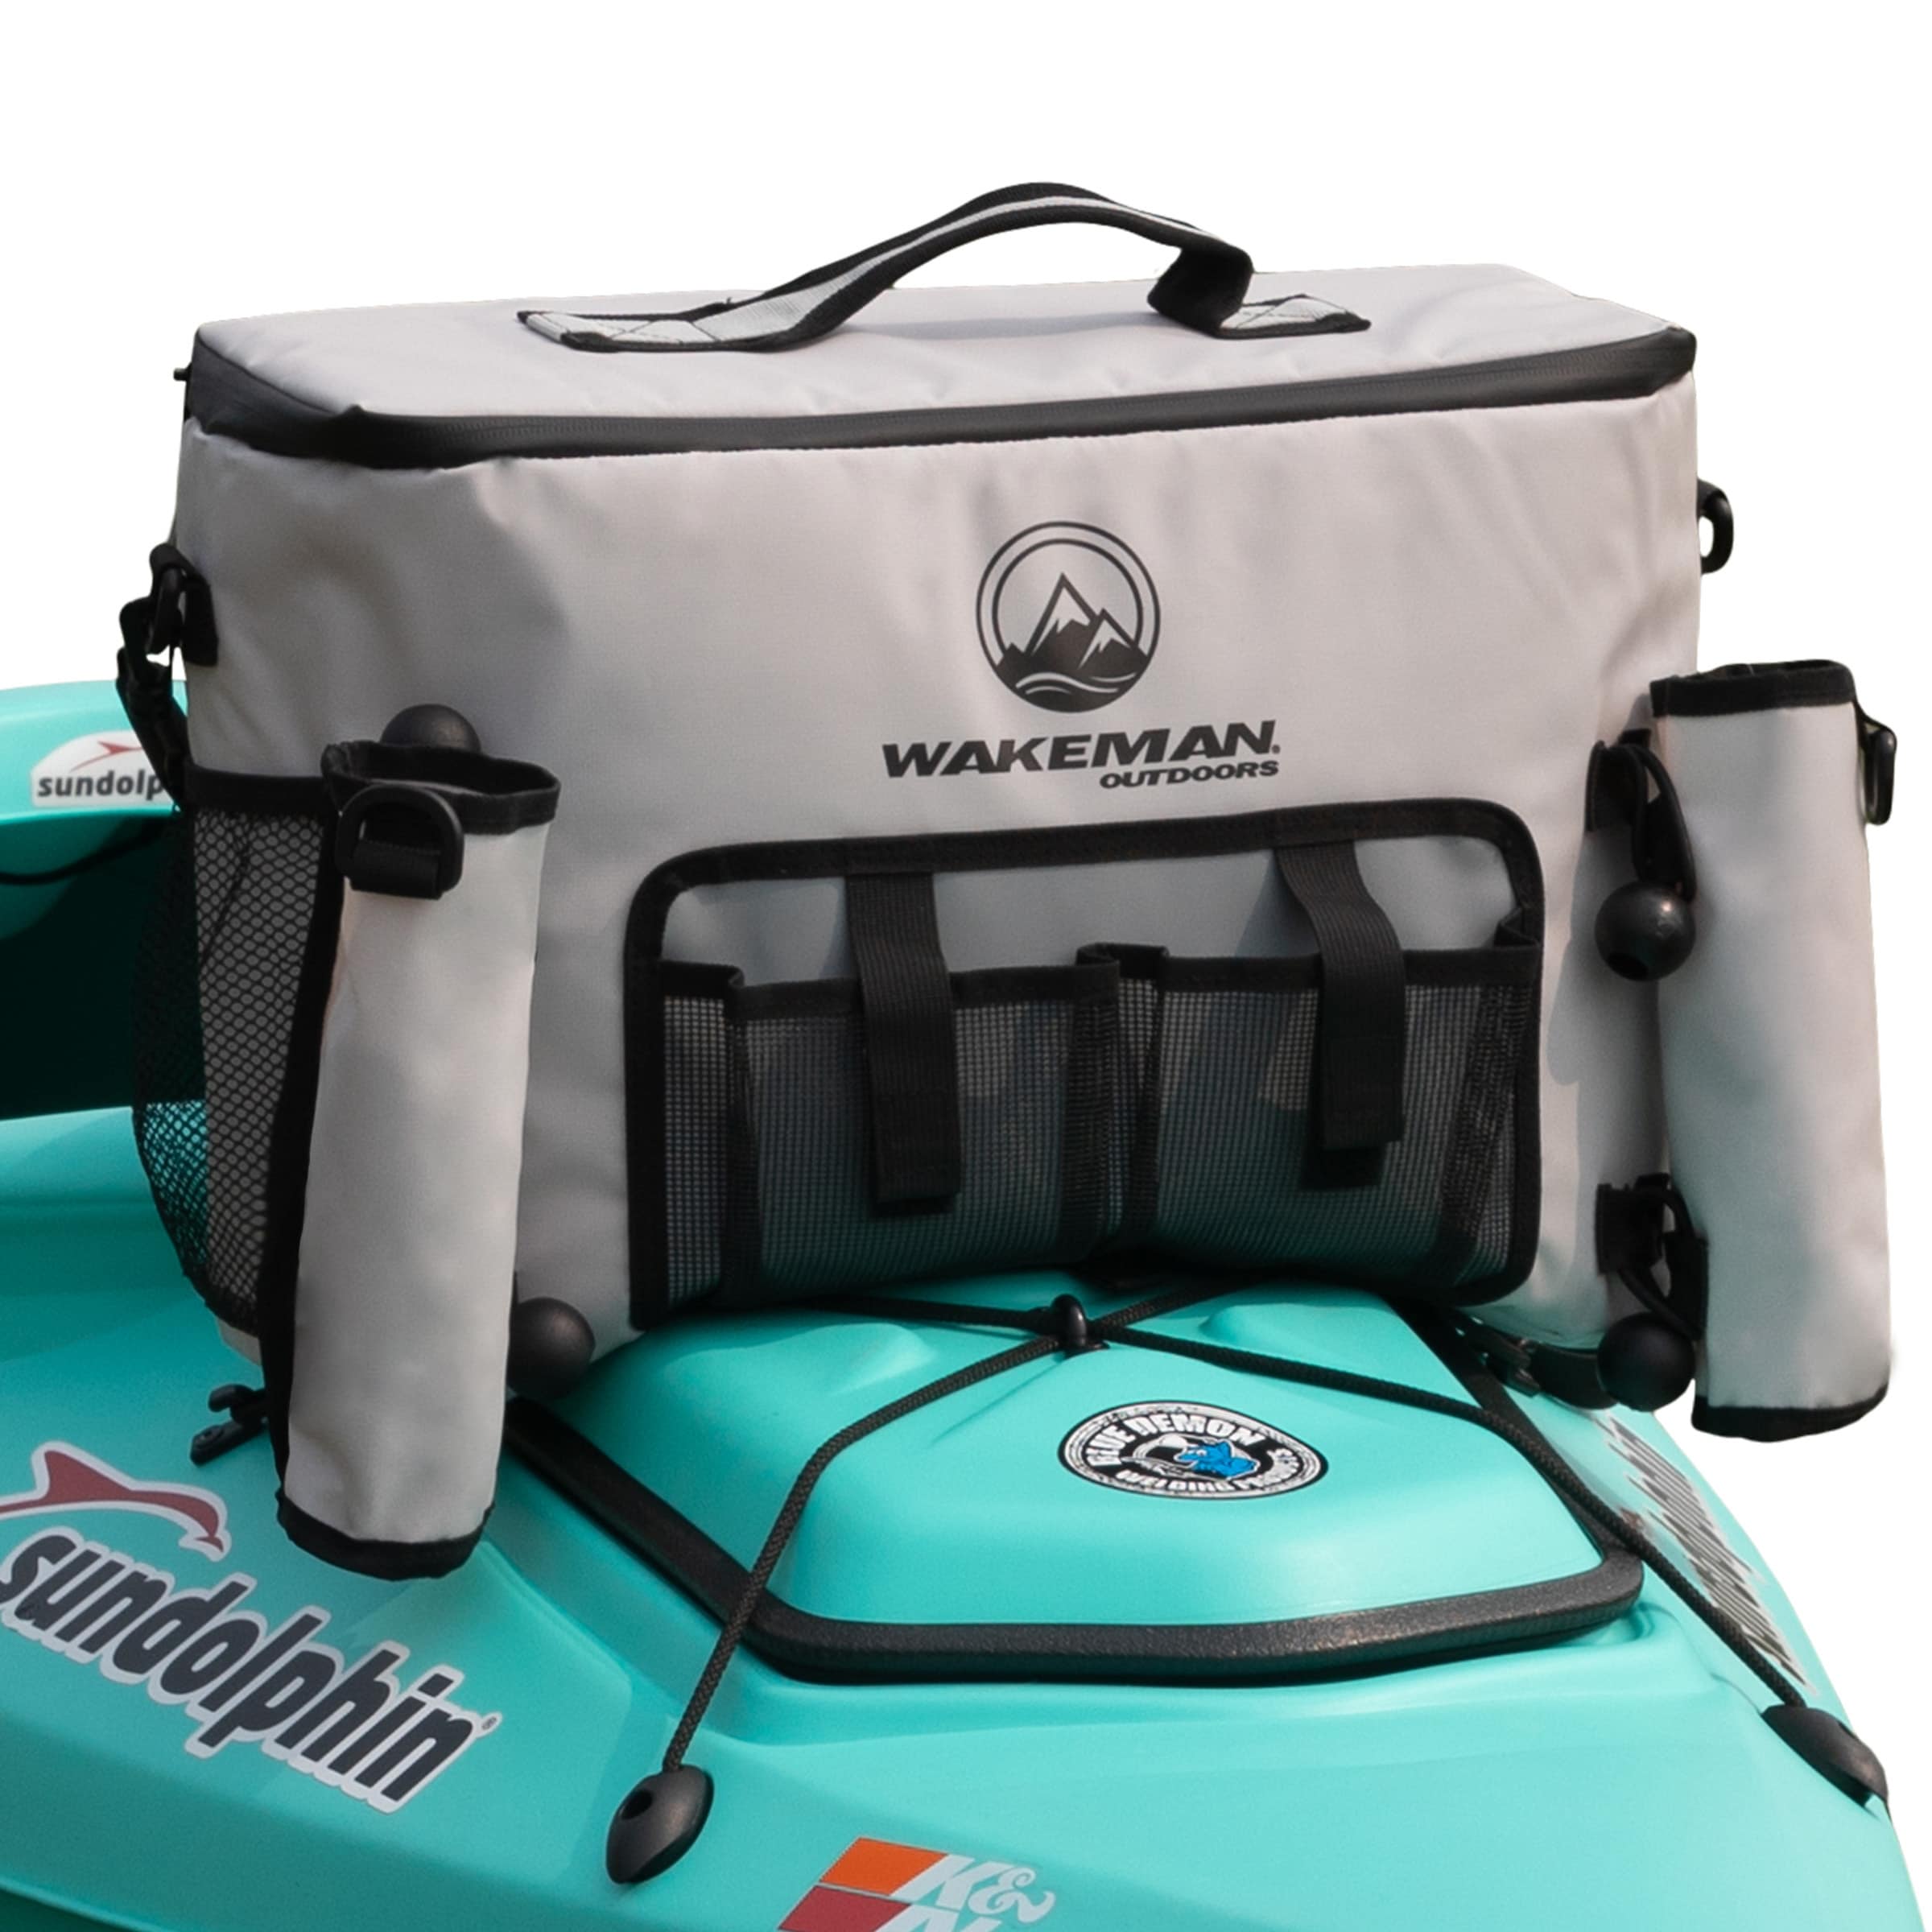 https://ak1.ostkcdn.com/images/products/is/images/direct/76e091dfdb294f649accf3859d6c155503641ae4/Kayak-Cooler---18L-Seat-Back-Fishing-Cooler---Water-Resistant-Insulated-Bag---8-12-Hour-Cooling-Time-by-Wakeman-Outdoors.jpg